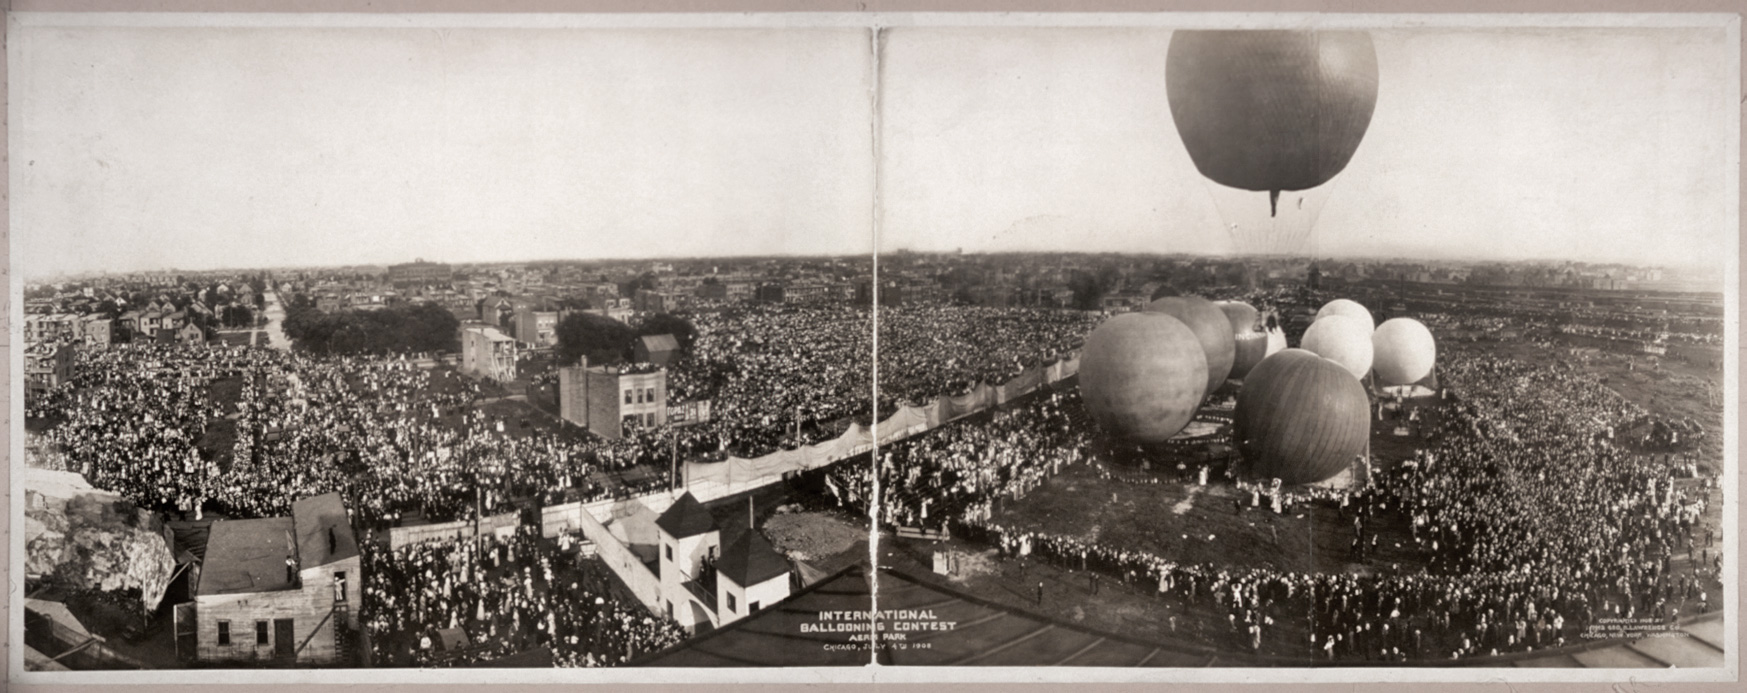 The International Ballooning Contest at Aero Park, Chicago, July 4th, 1908. View full size.